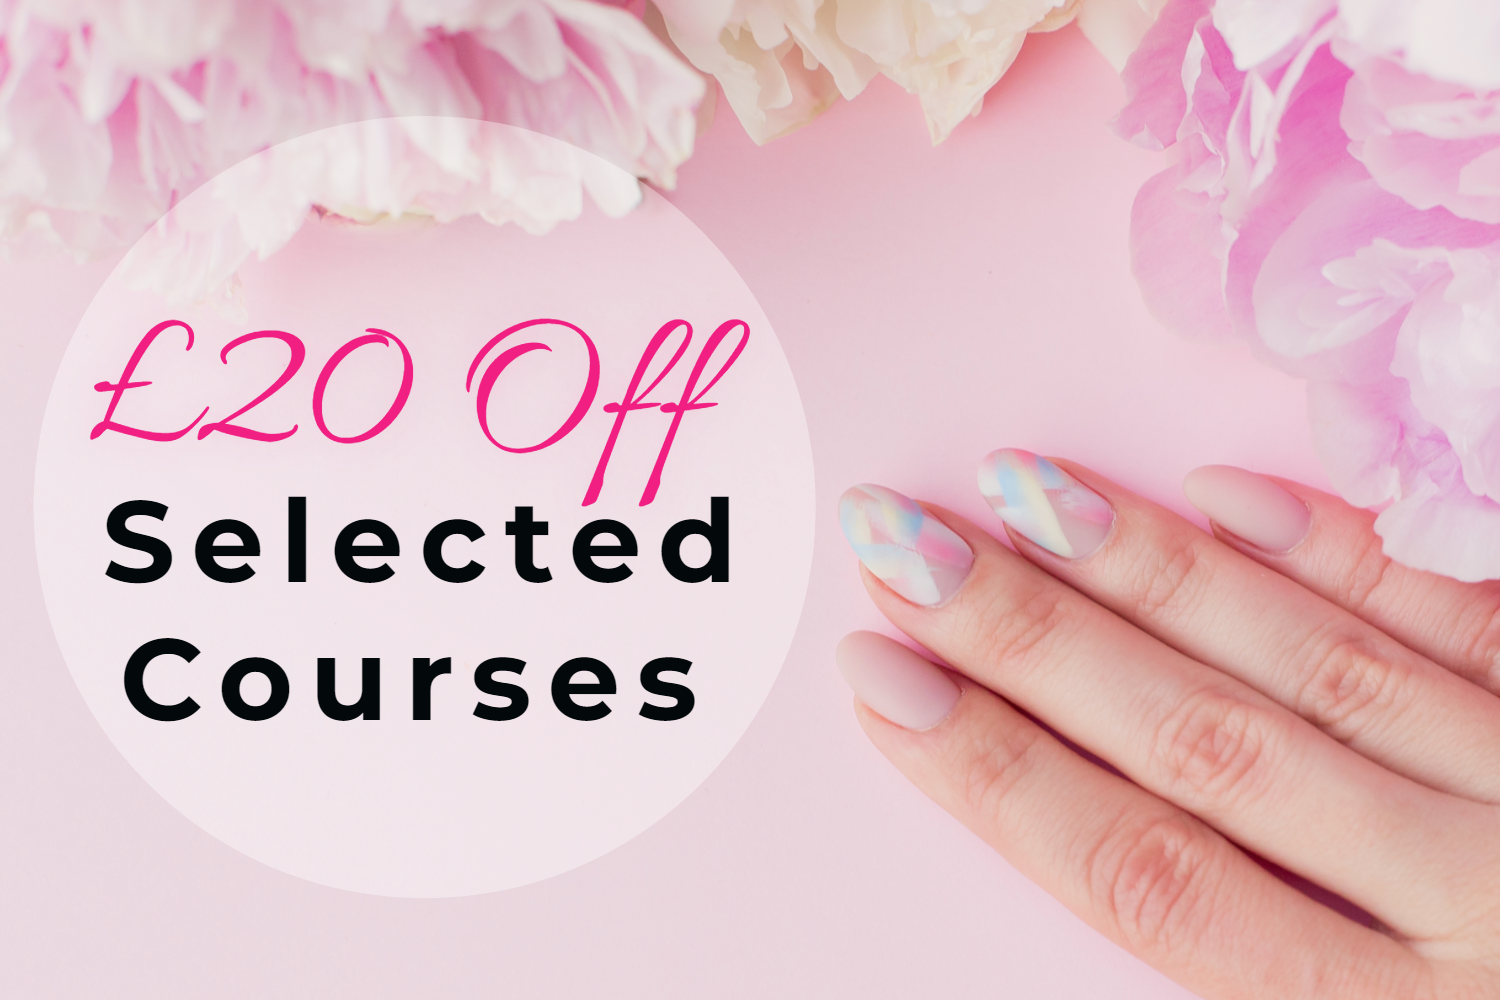 The Beauty Academy | Accredited Beauty Training Courses